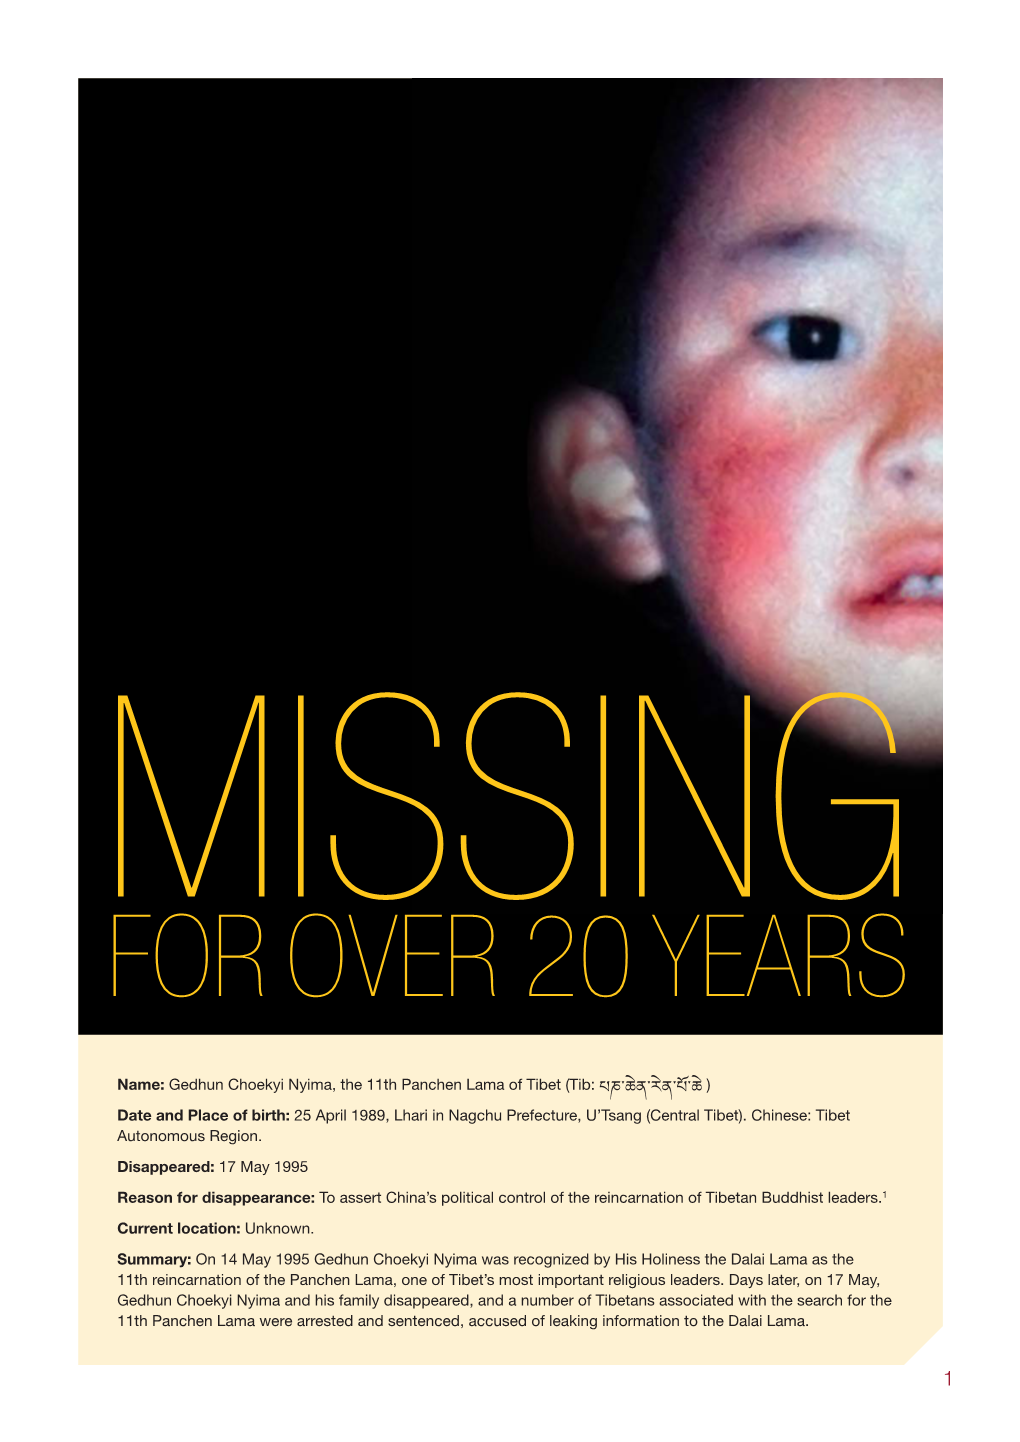 Missing for Over 20 Years. Gedhun Choekyi Nyima, the 11Th Panchen Lama